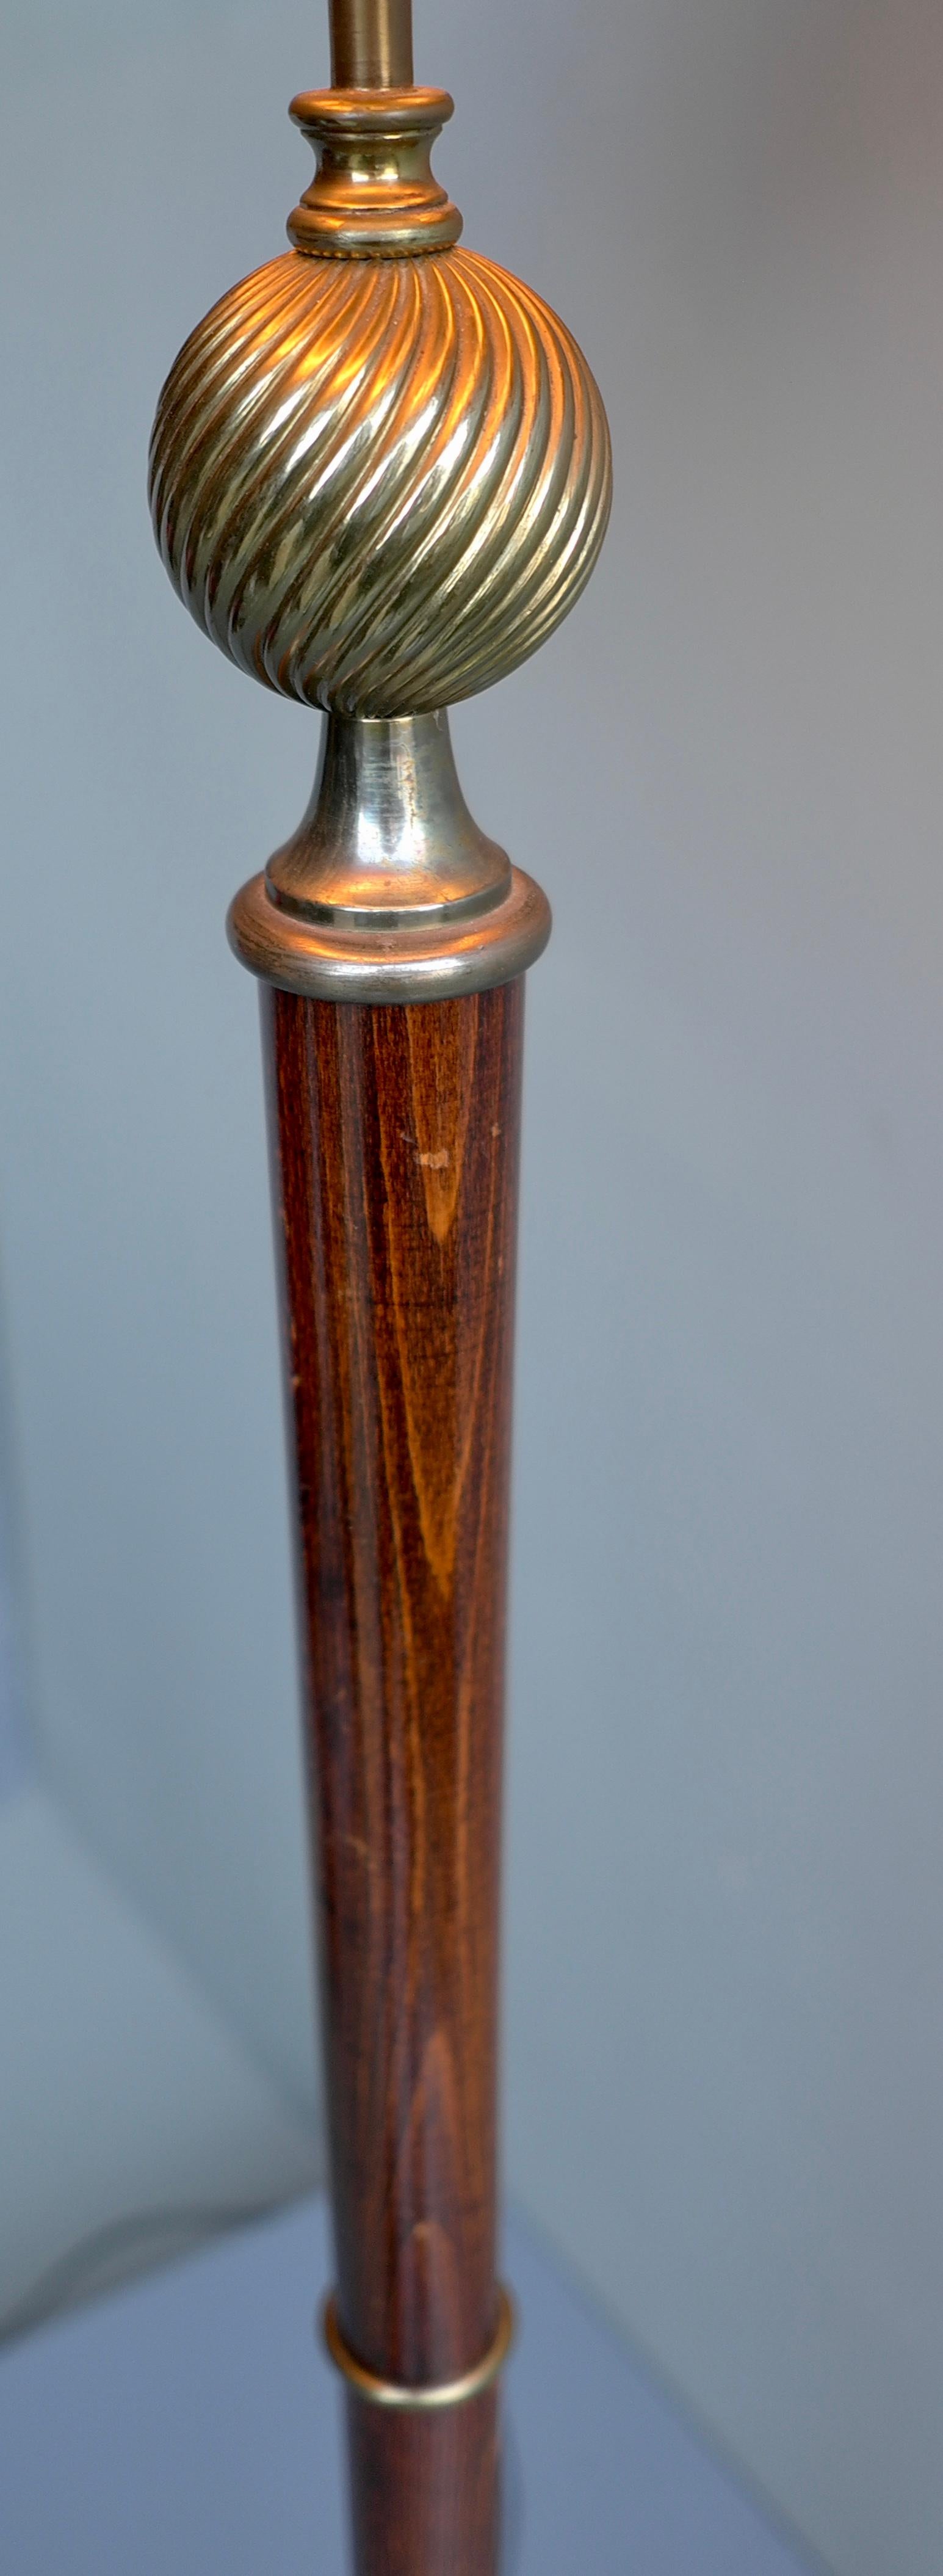 Art Deco Floor Lamp in Walnut Wood, with Fine Brass Details, France 1930's For Sale 2